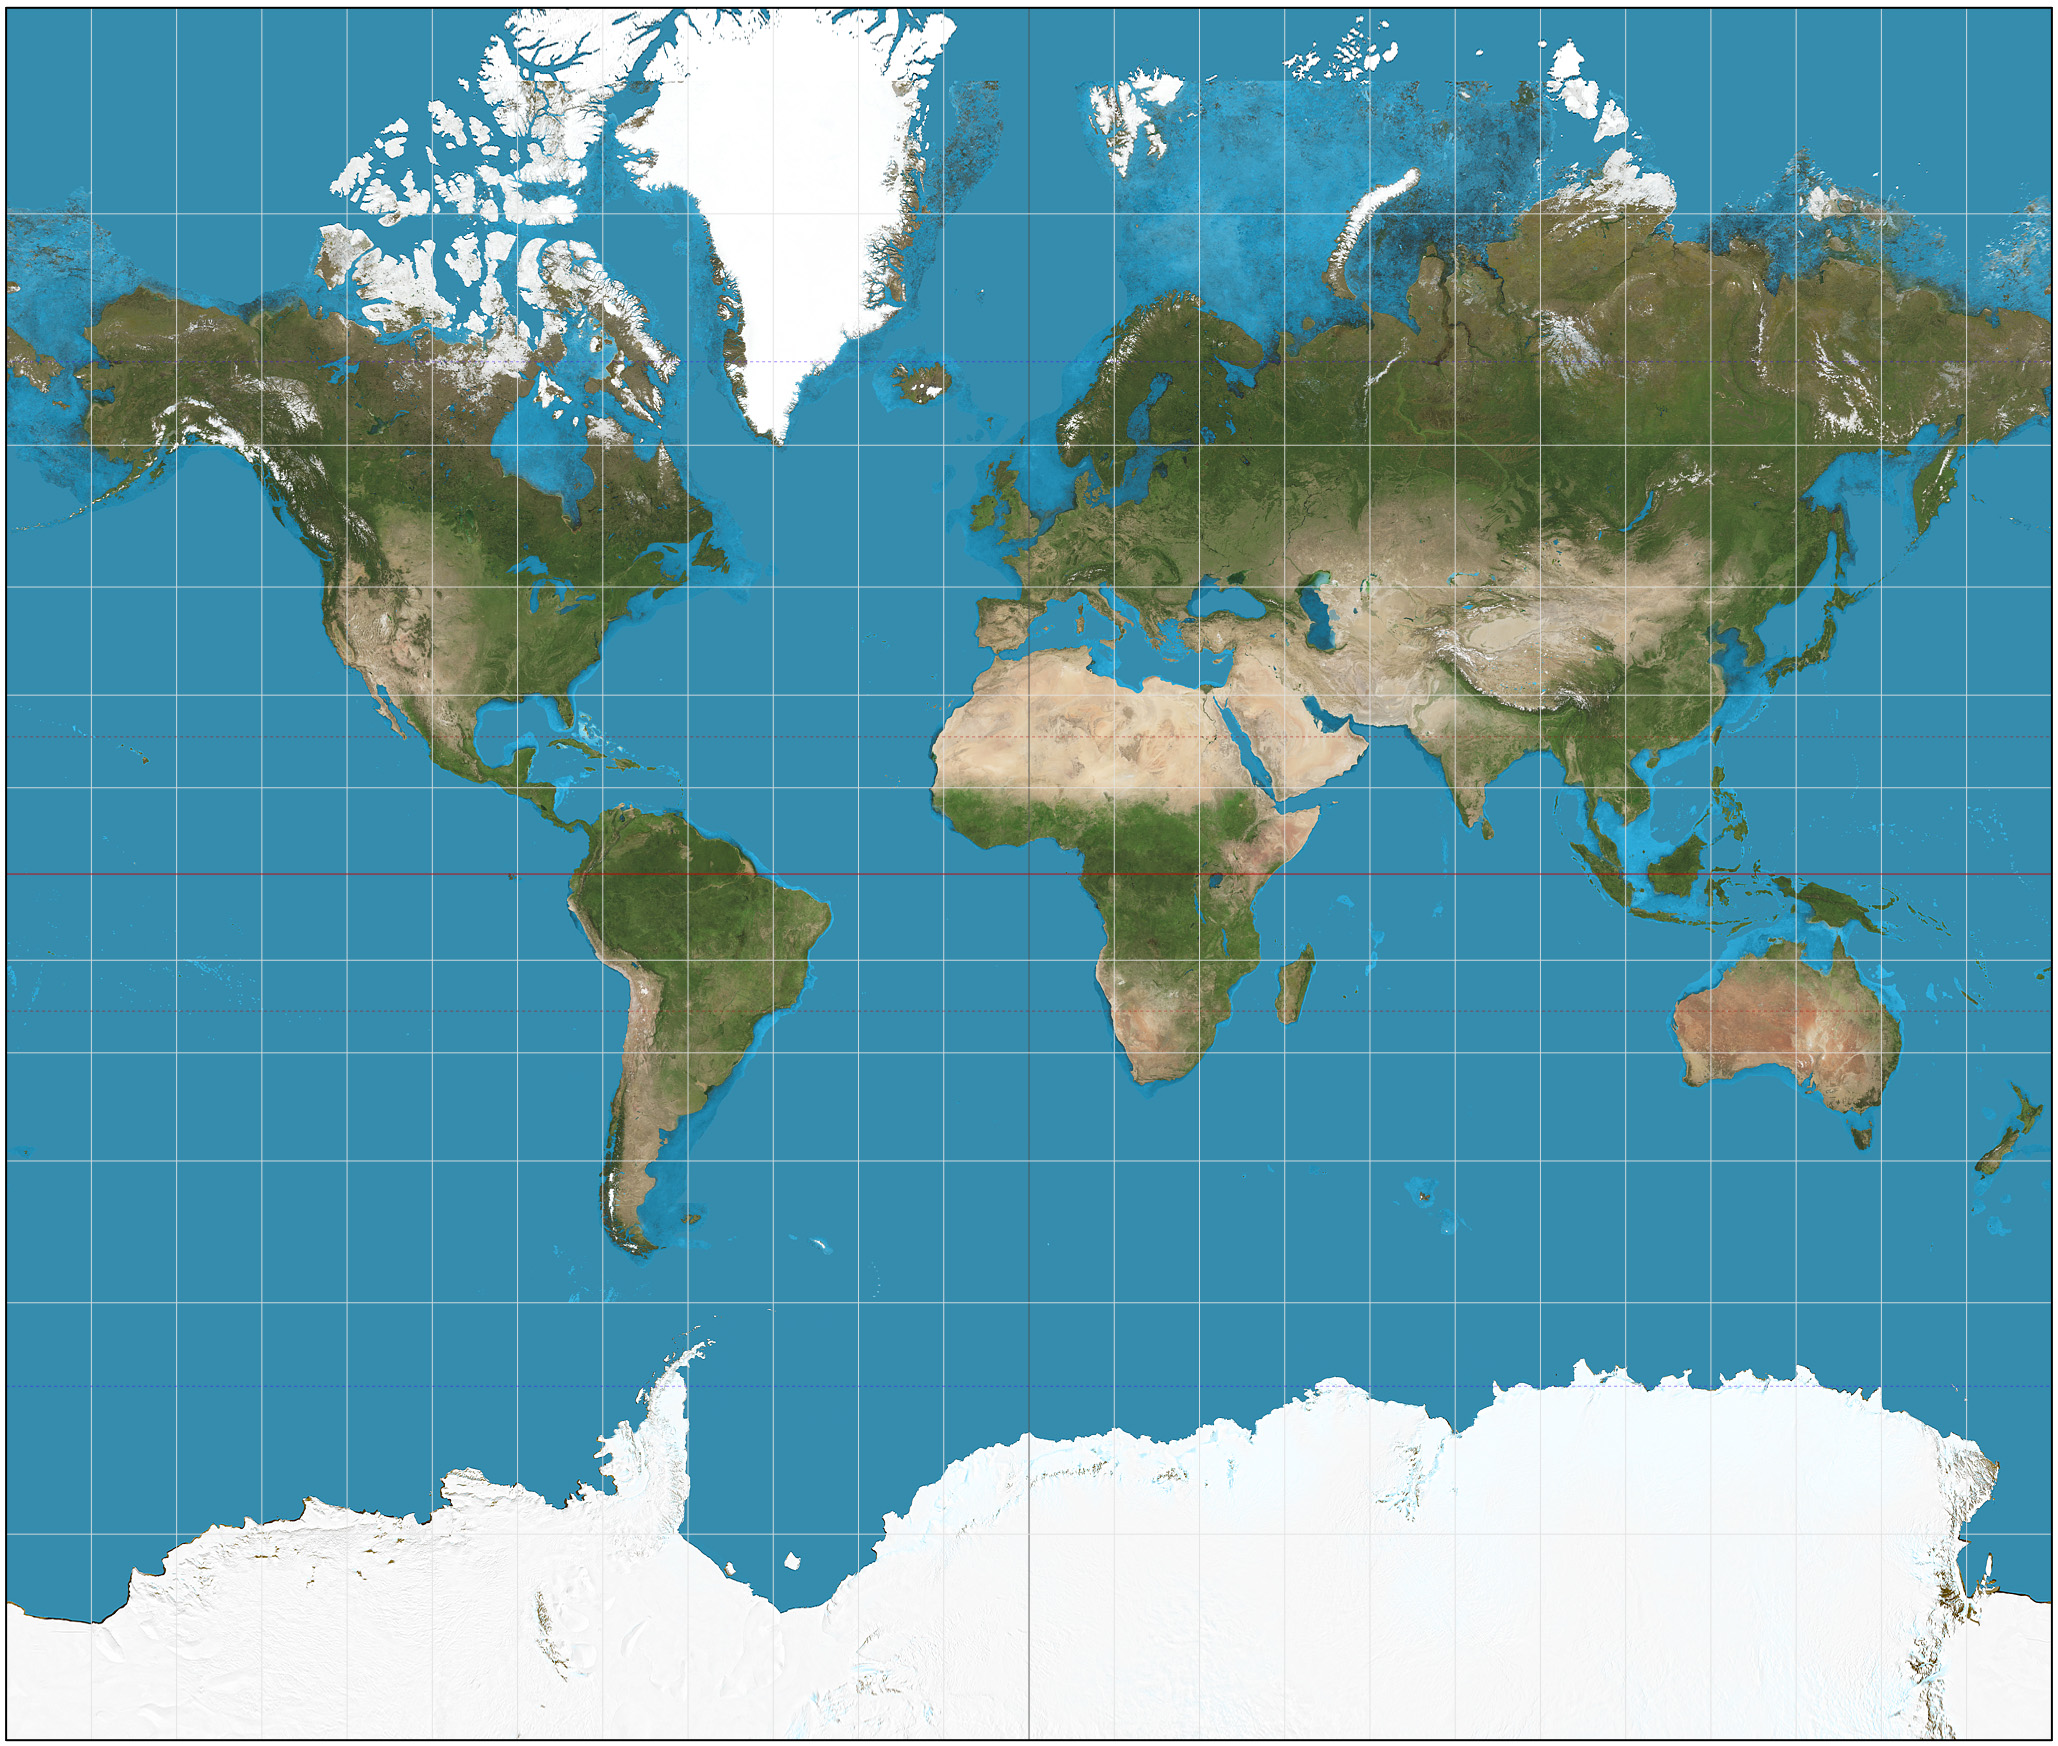 map of the world using the Mercator projection